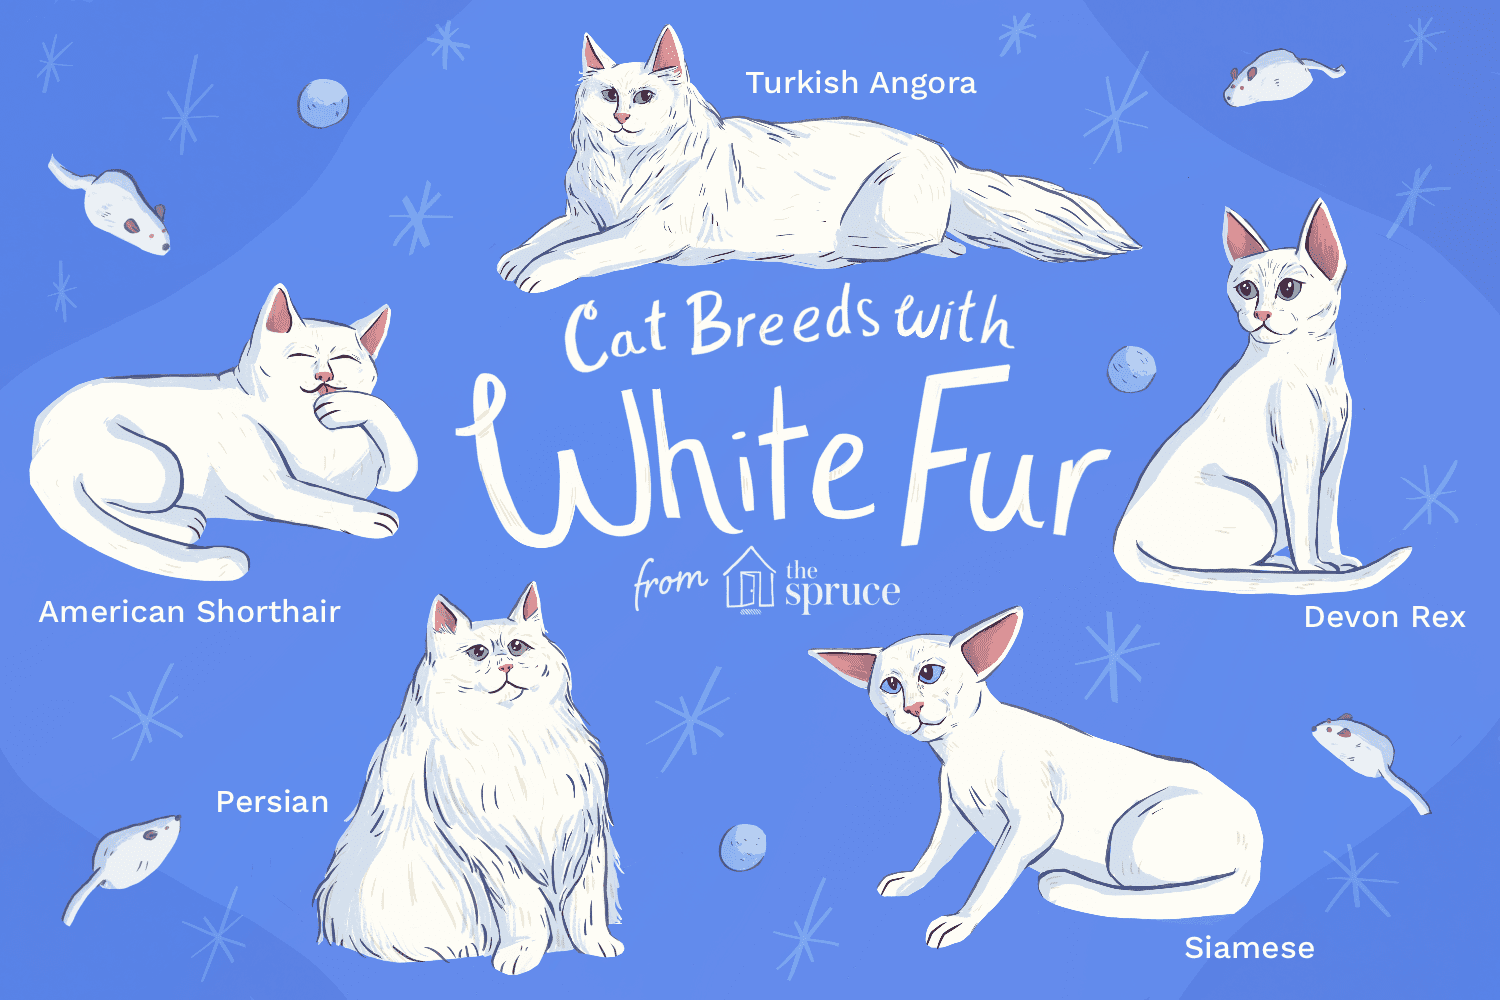 cat breeds with white fur illustration